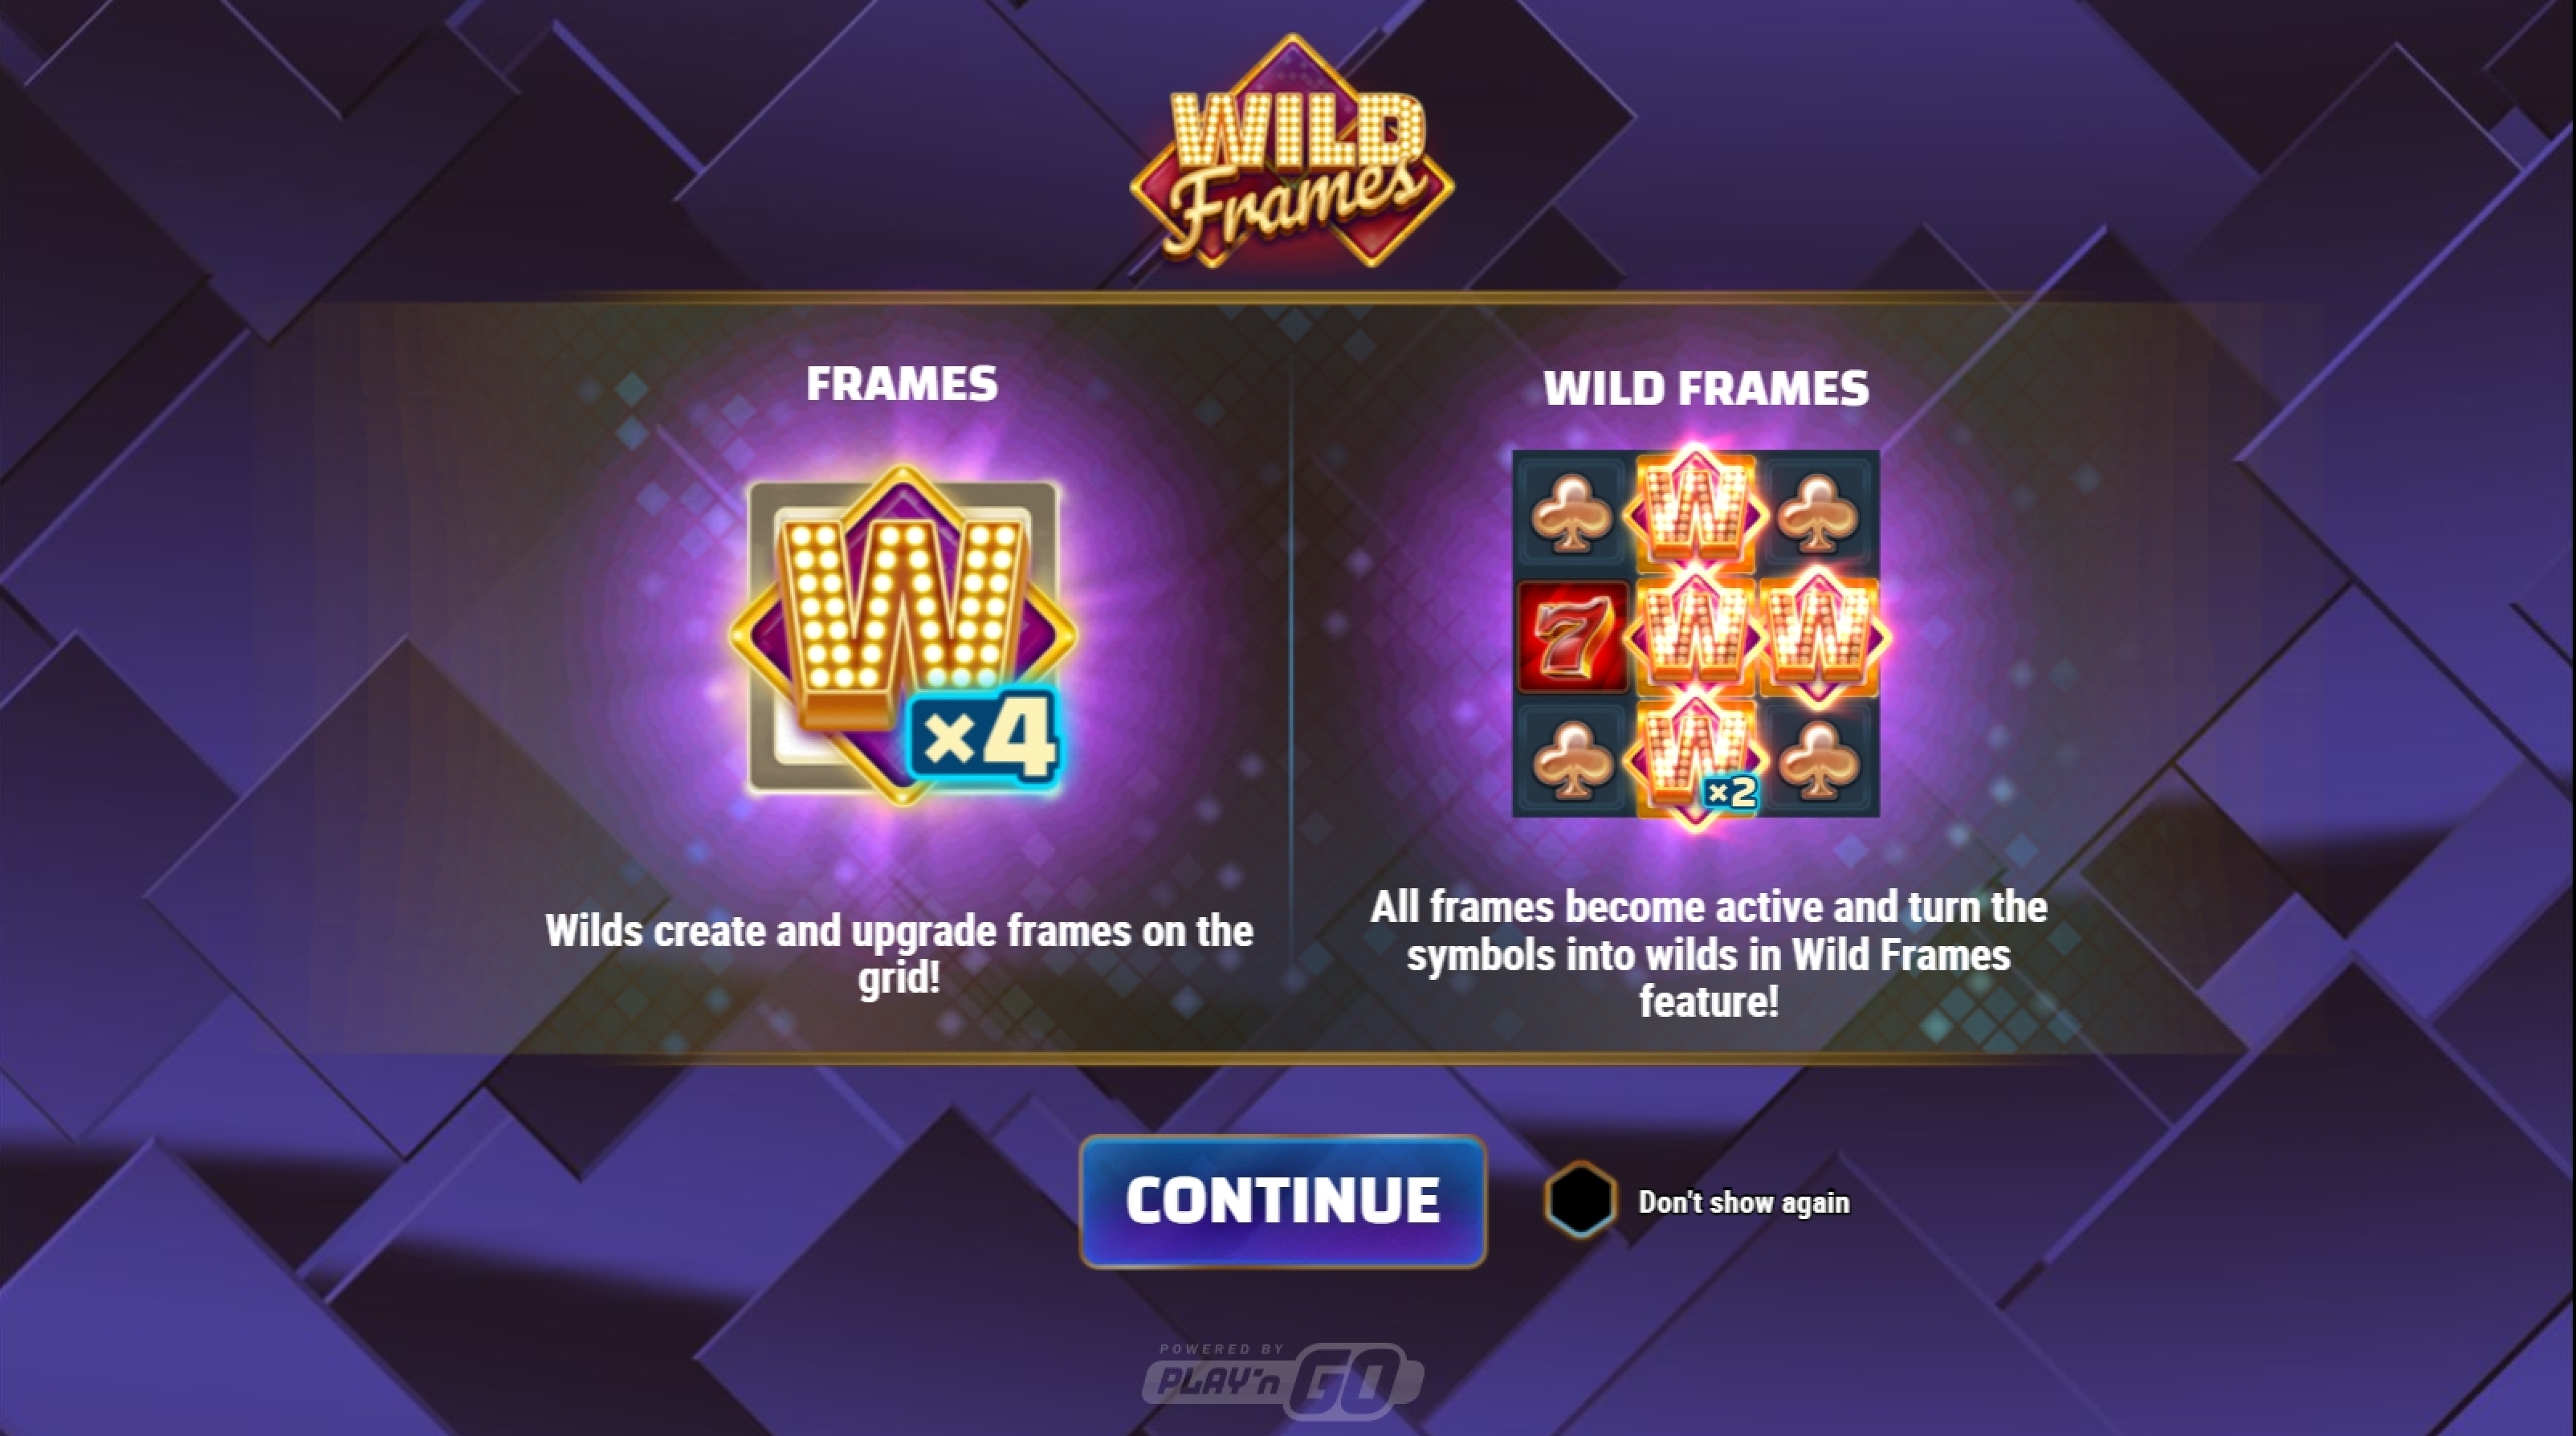 Play Wild Frames Free Casino Slot Game by Playn GO